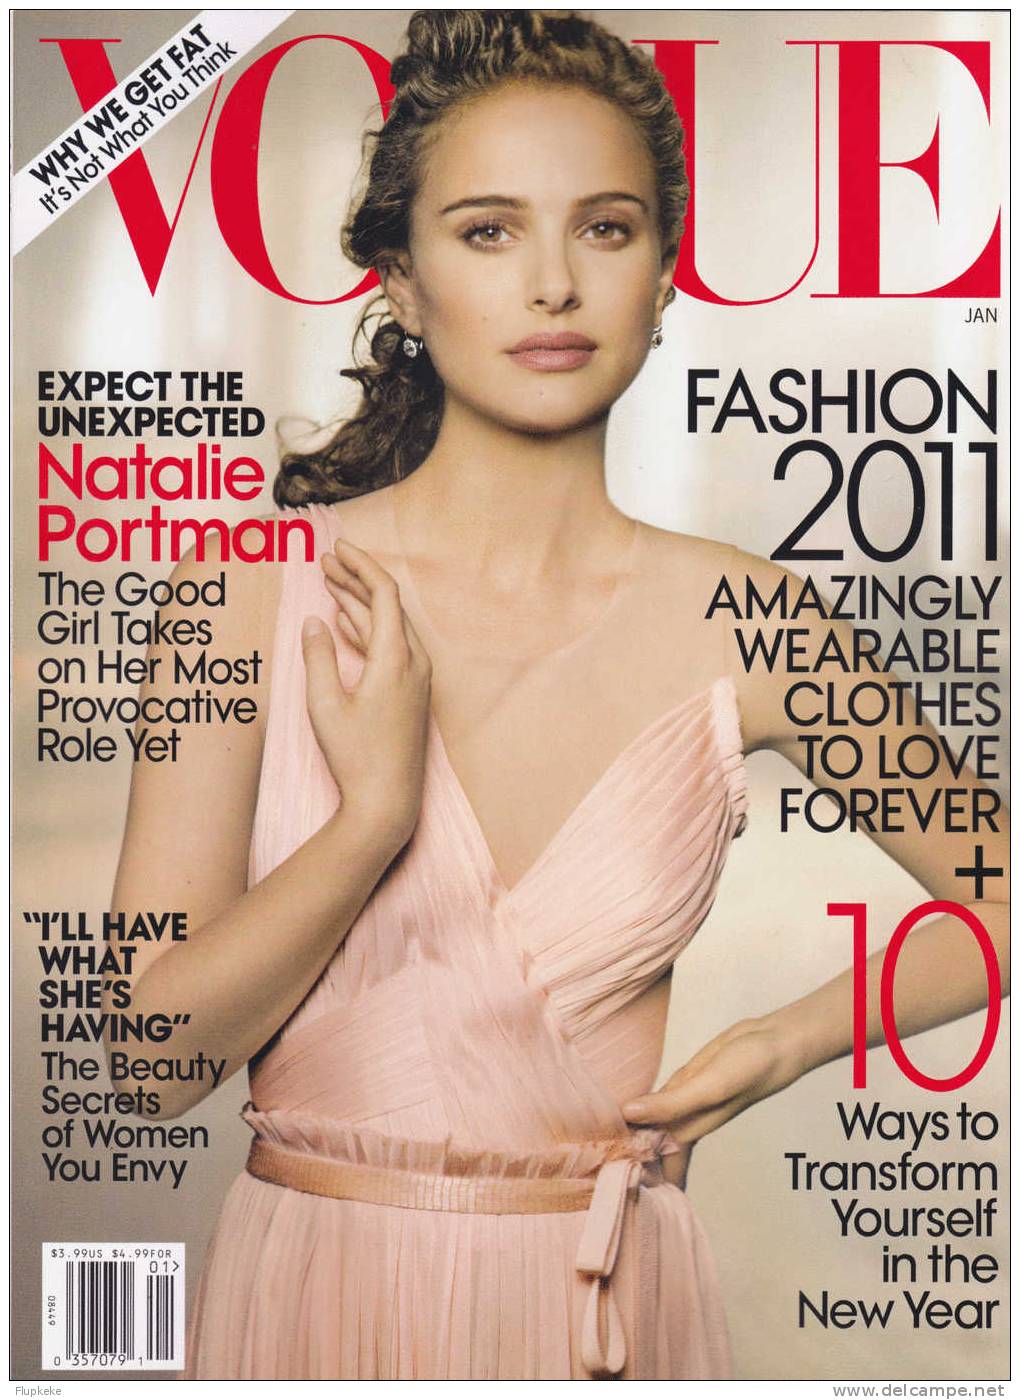 Vogue January 2011 Cover Natalie Portman Expect The Unexpected The Good Girl Takes On Her Most Provocative Role Yet - Entretenimiento